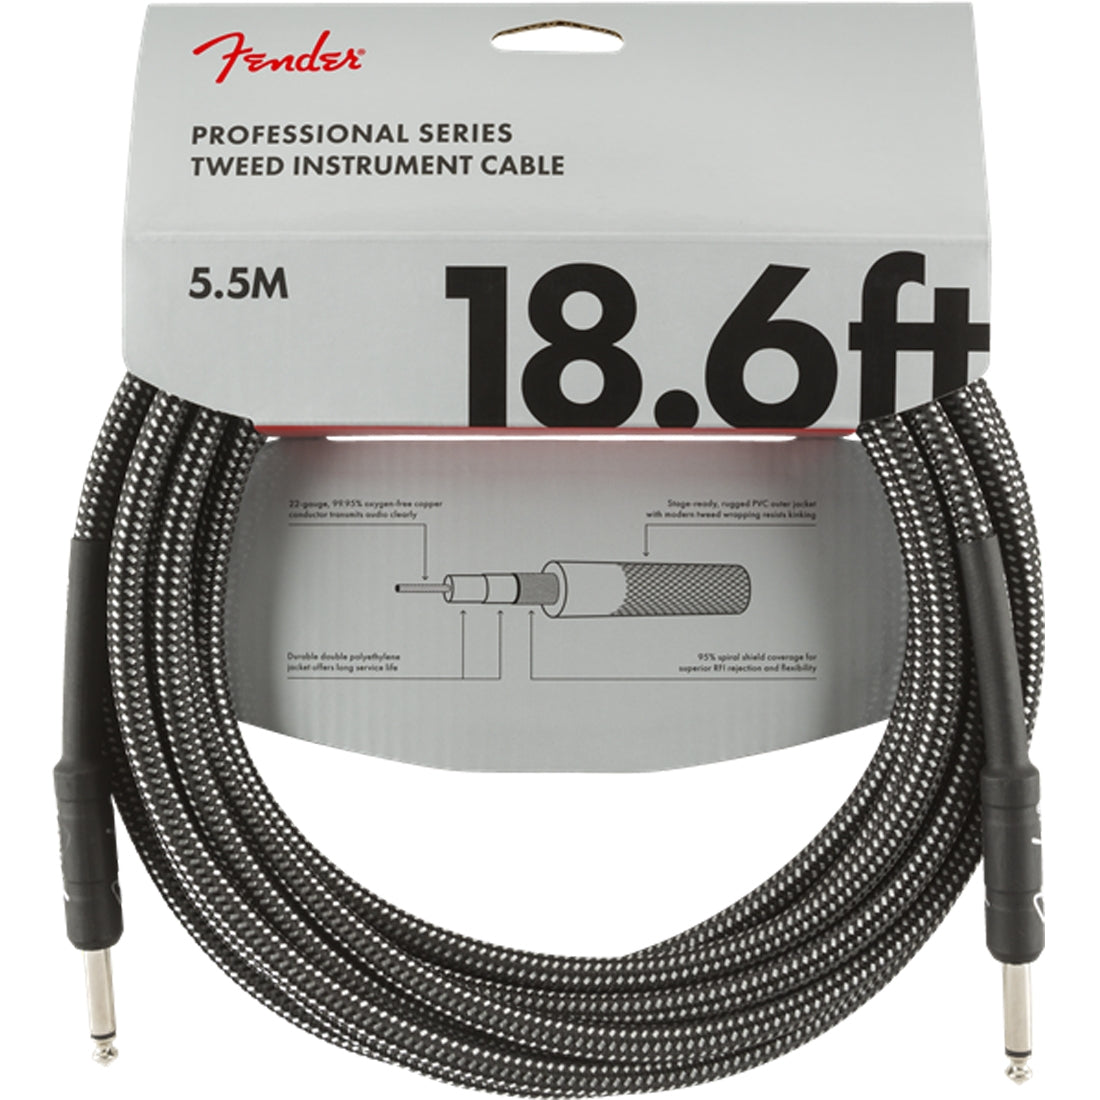 Fender Professional Series Instrument Cable 5.5m (18.6ft) Gray Tweed - 0990820068